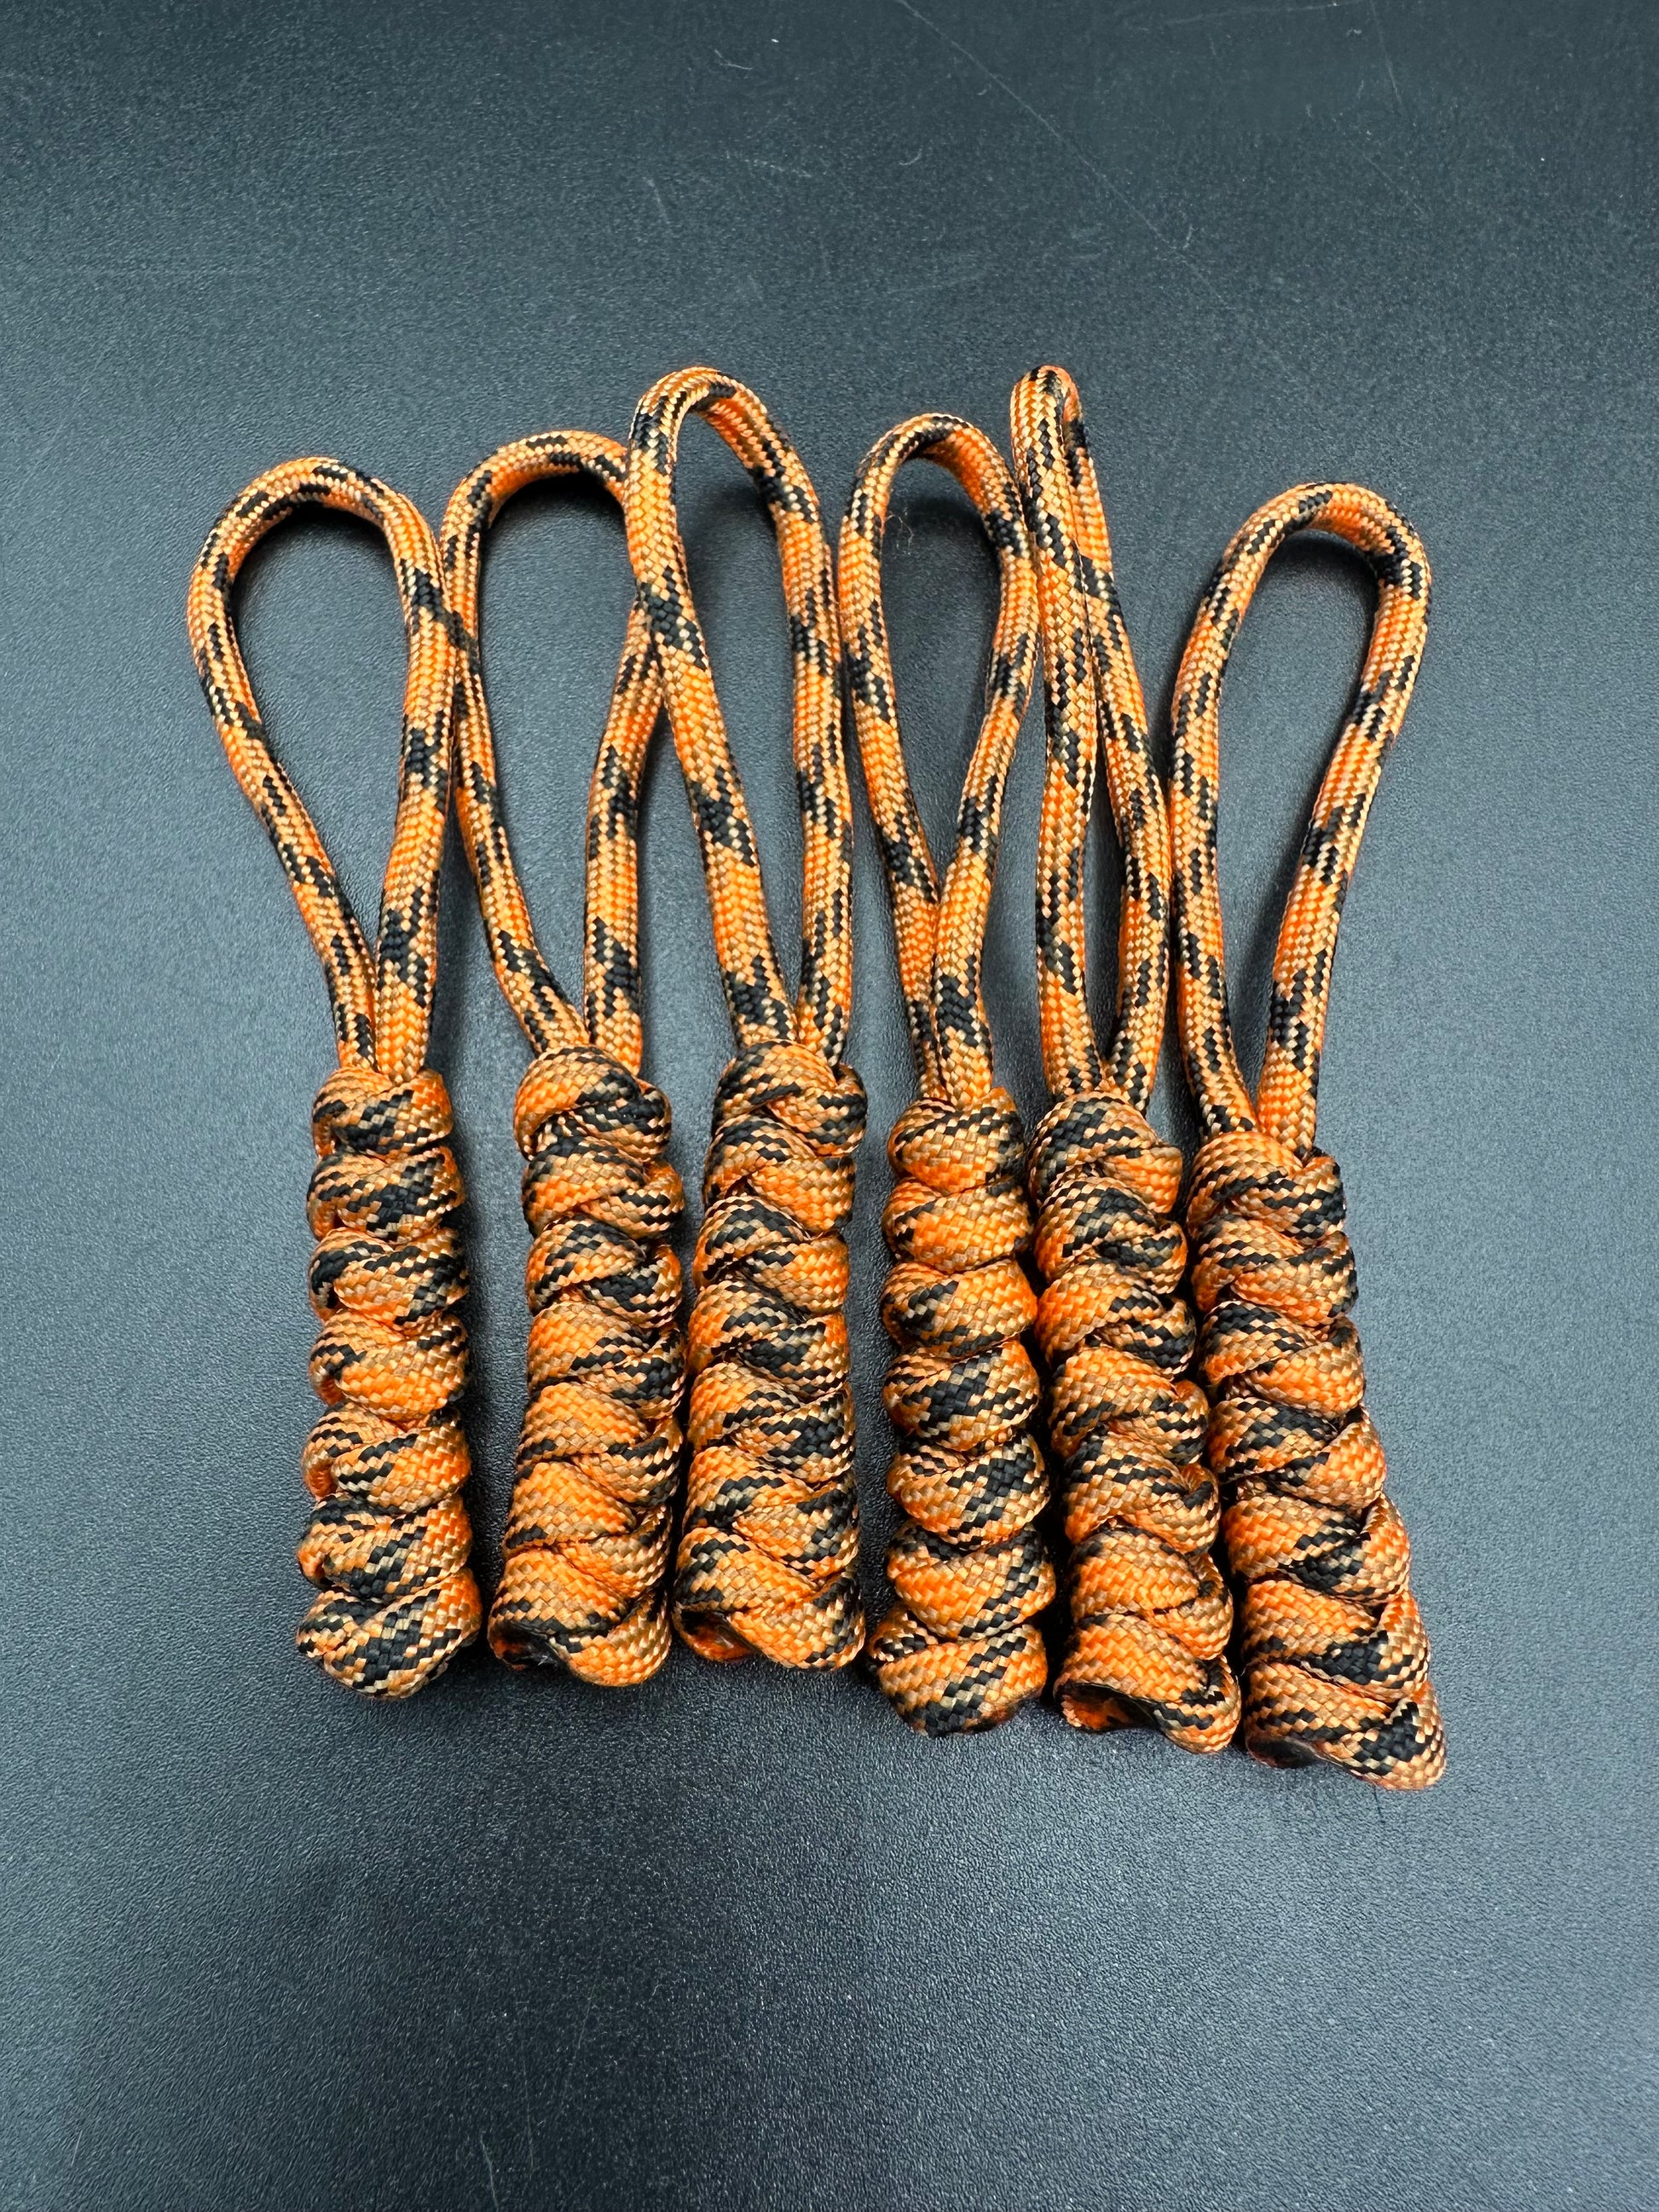 Paracord zip pulls in a Halloween themed pumpkin orange (black orange mix)
Sold as a 6 pack theses are light weight, strong and all handmade in our U.K. store